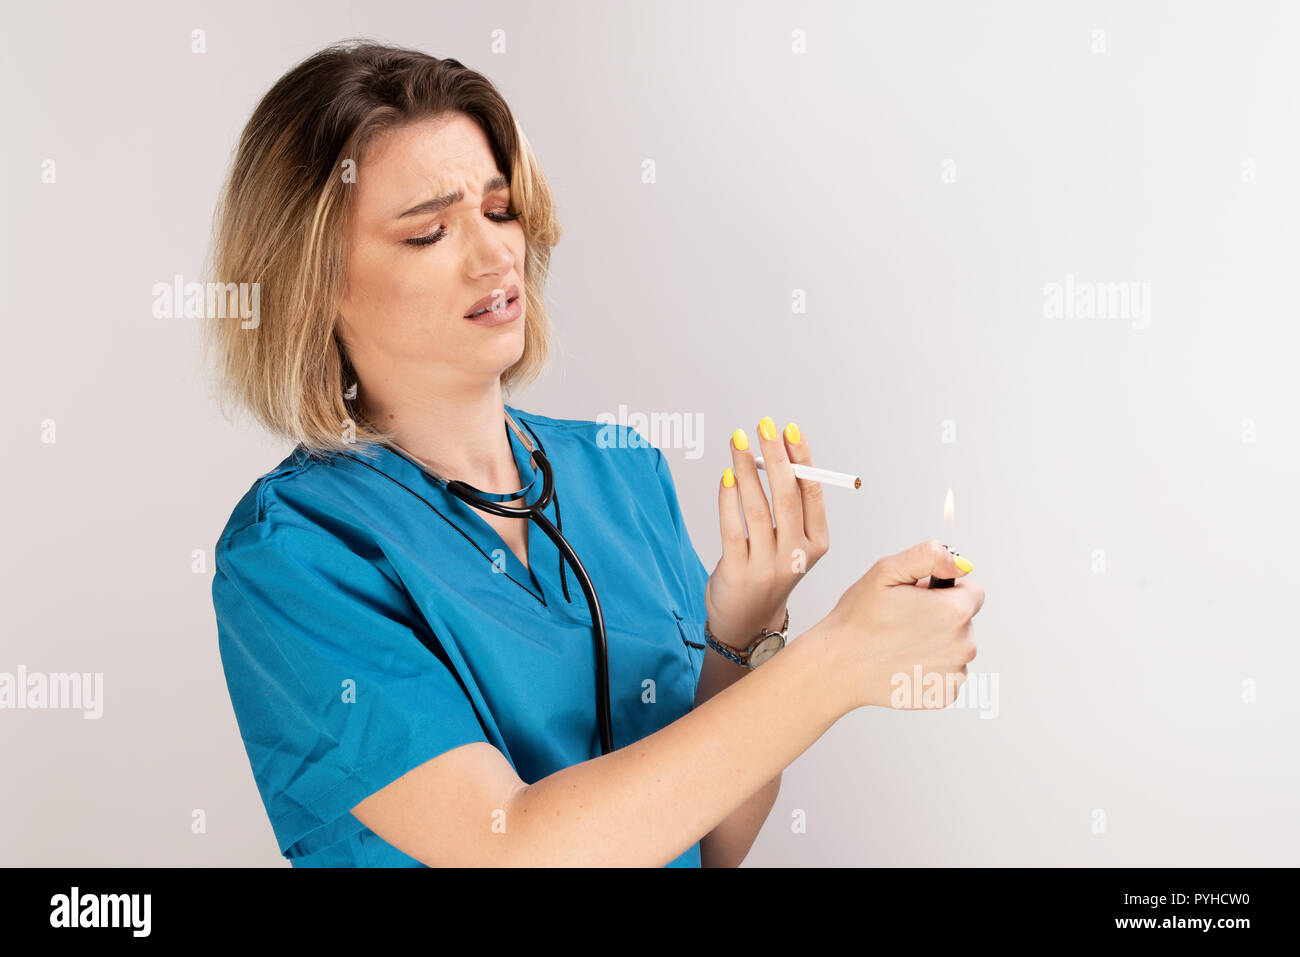 Female doctor with stethoscope, cigarette and lighter looking negative on smoking. Smooking is a bad habbit for health Stock Photo